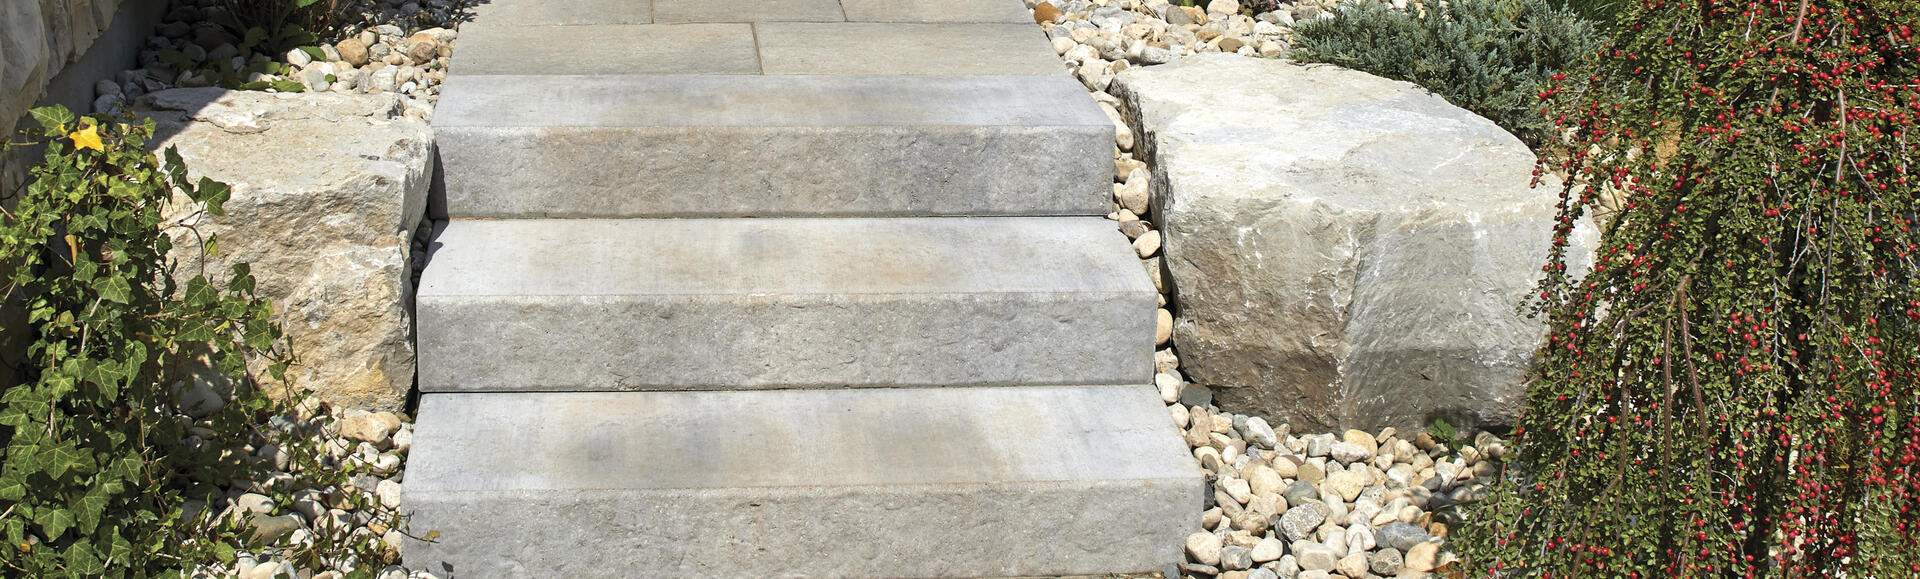 Aria Step by Oaks Landscape Products